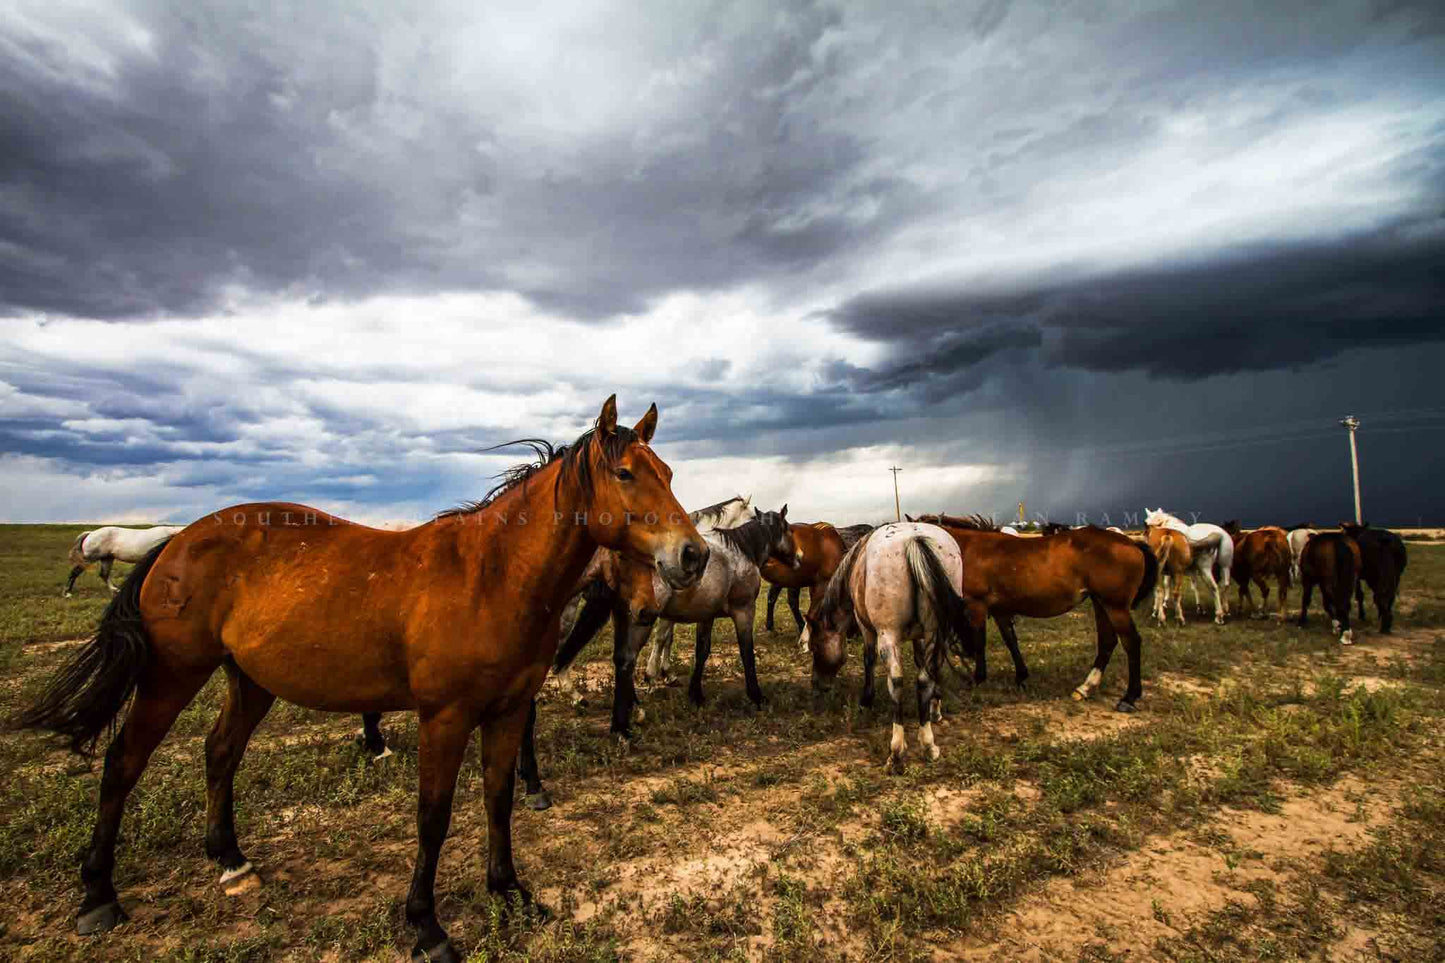 Equine photography print of a horse proudly watching over the herd as a storm approaches on a spring day in Oklahoma by Sean Ramsey of Southern Plains Photography.